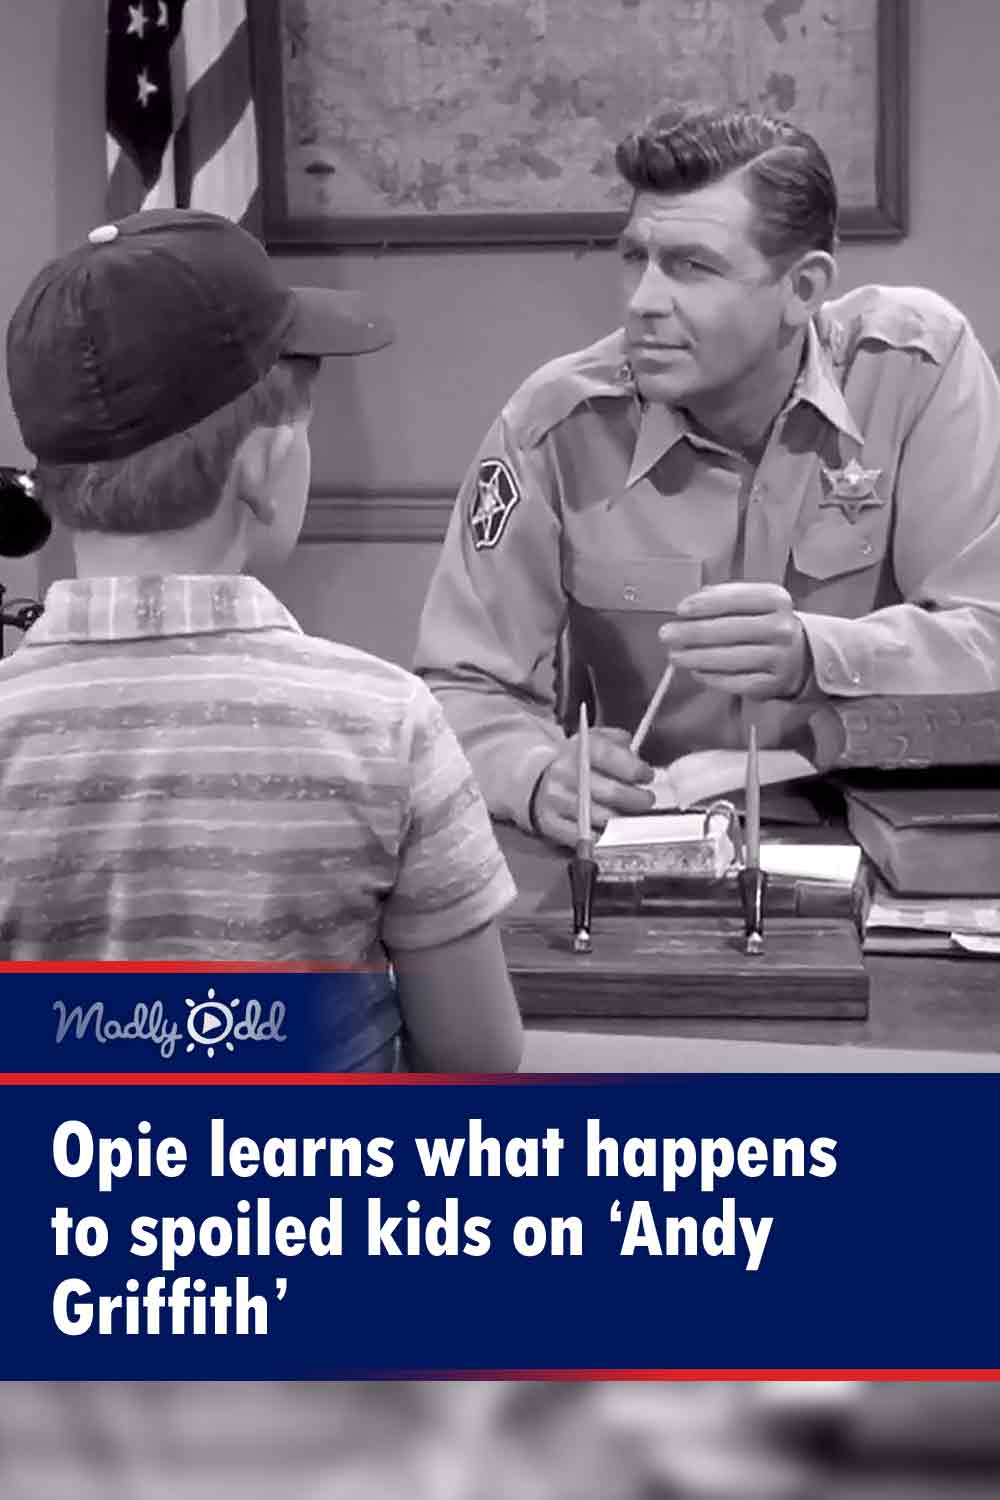 Opie learns what happens to spoiled kids on ‘Andy Griffith’